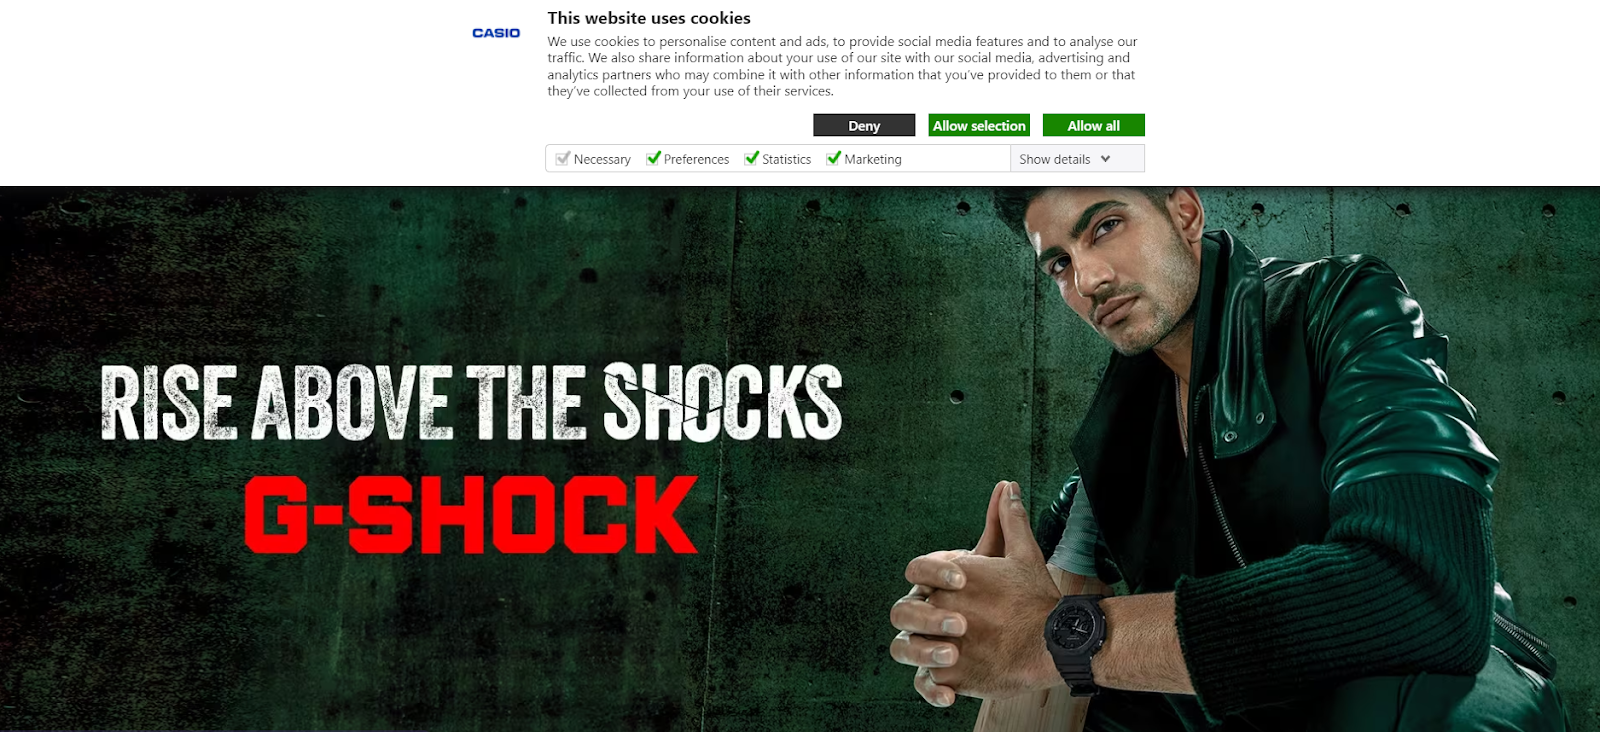 Cookie consent banner used by G-Shock